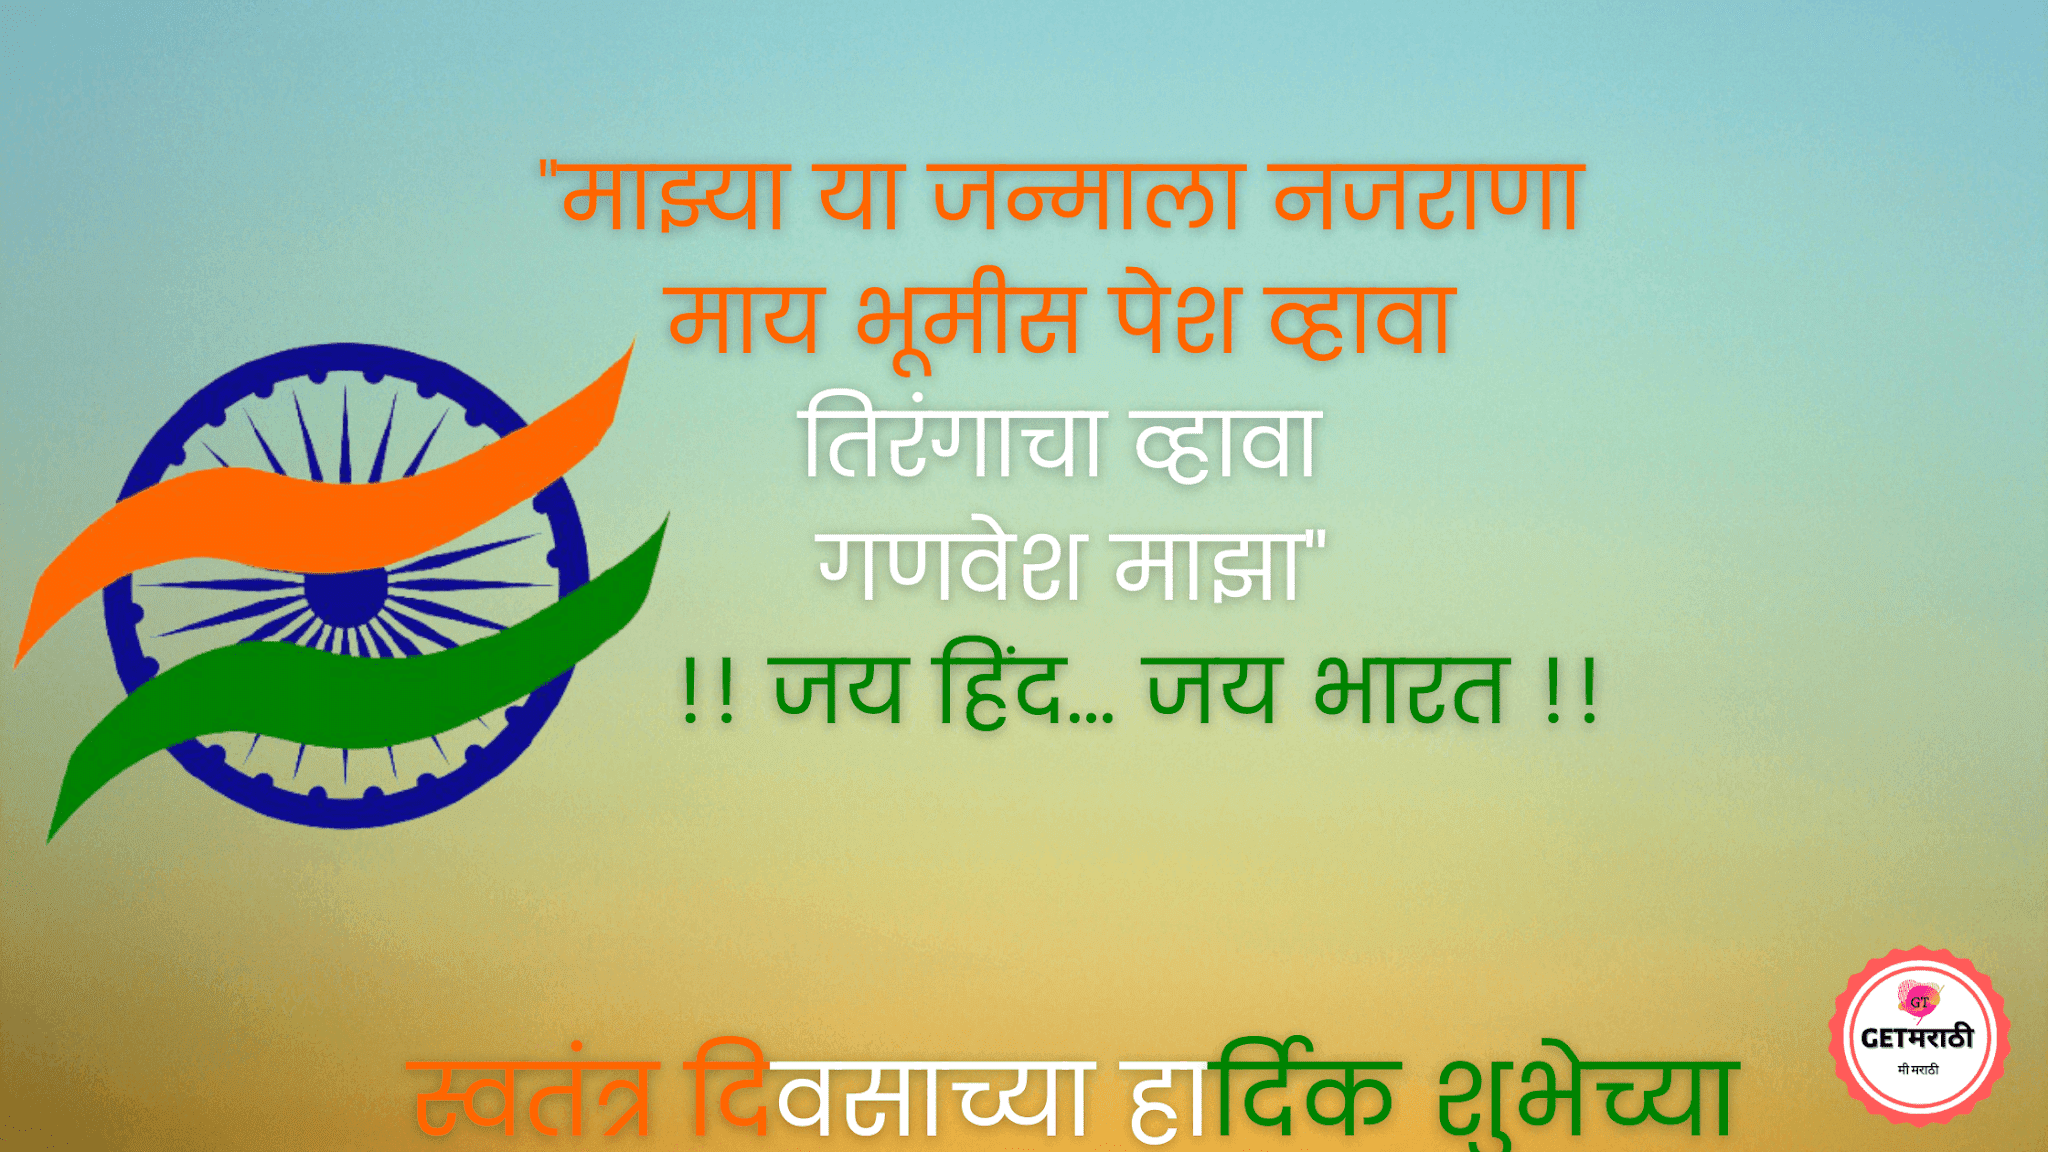 Happy Independence Day Quotes, kavita In Marathi